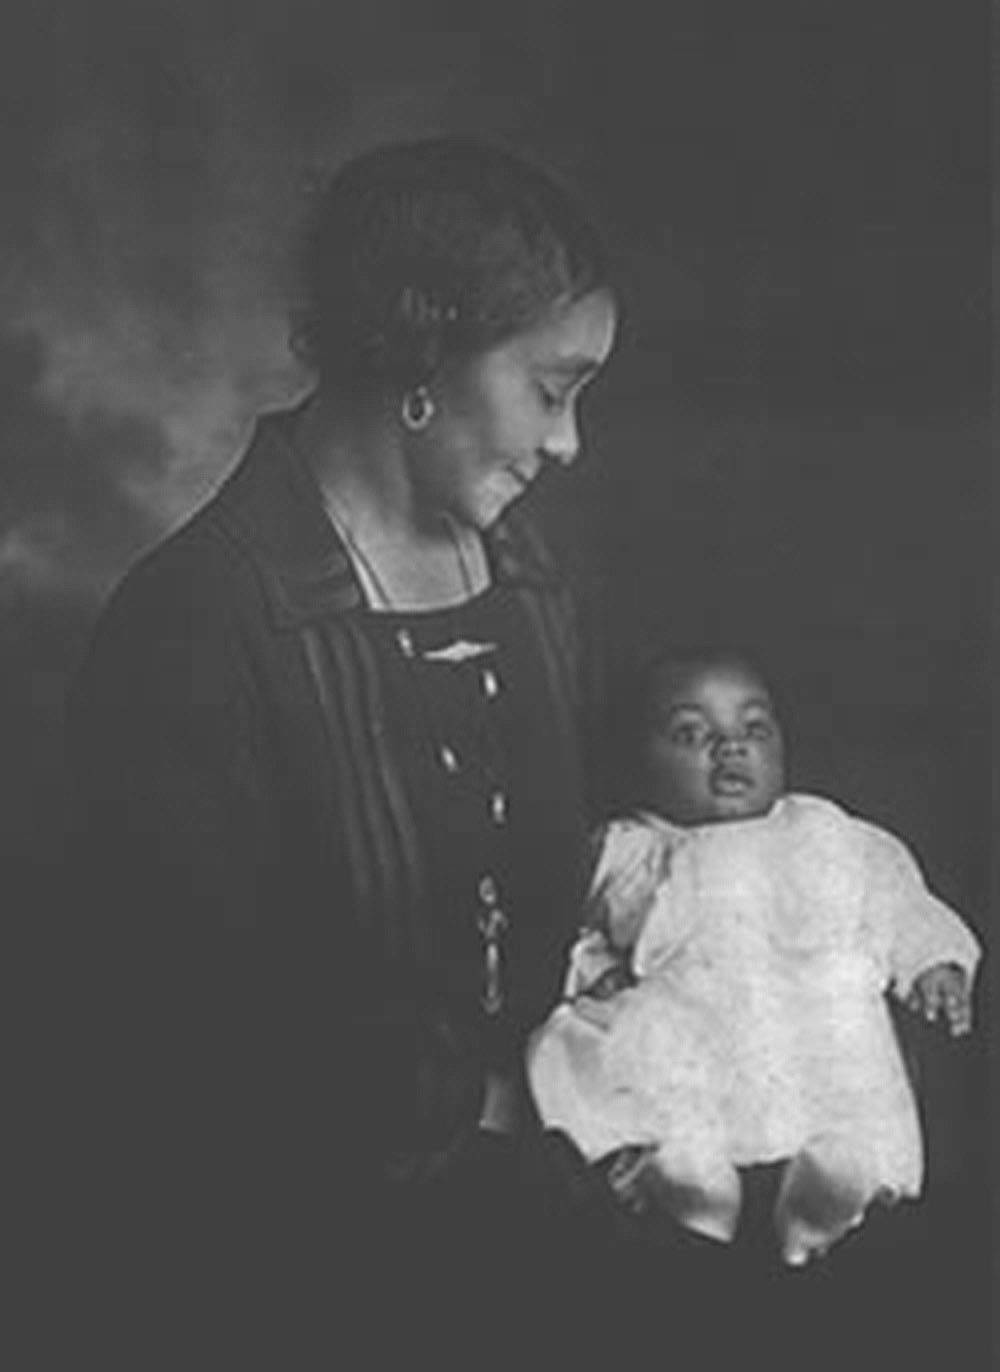 A Black woman holds a Black baby wearing a white garment. The background of the image is dark. Photo provided by Barb Garvey.